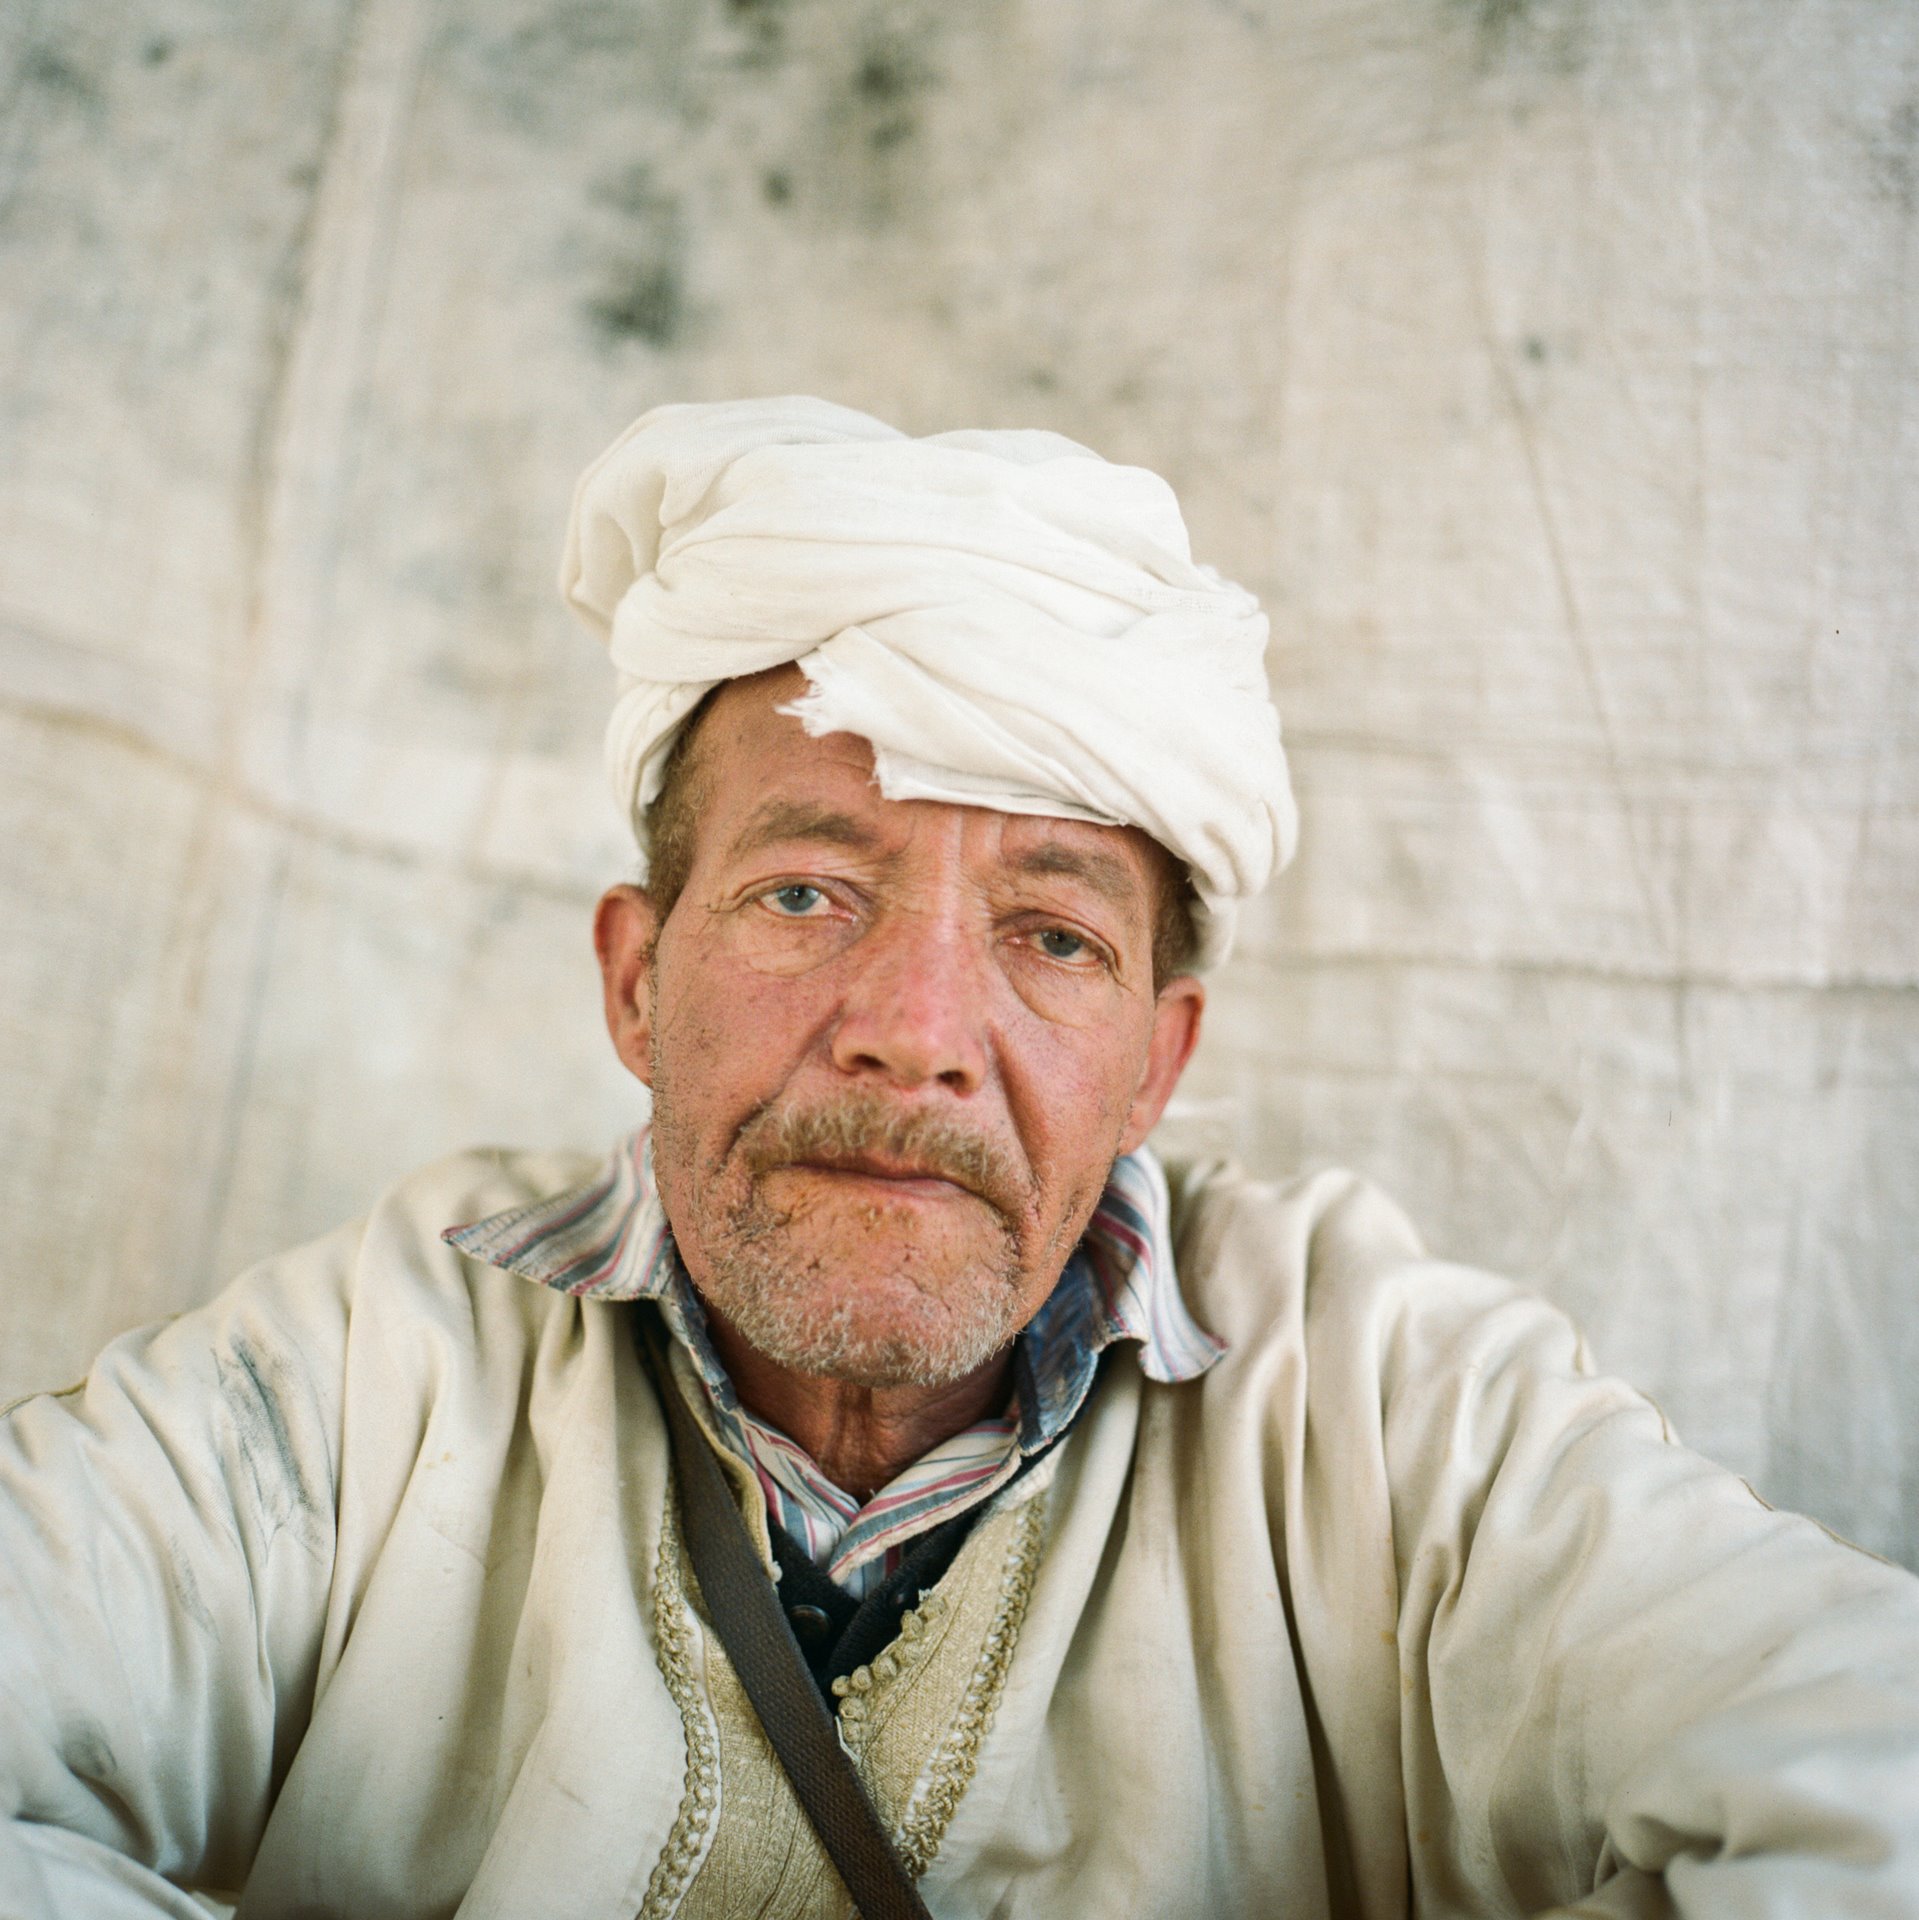 <p>Ahmed Marzak (&ldquo;Hamdani&rdquo;, 62), photographed in Zagora, beside the Oued Draa river in eastern Morocco, has access to several wells. As the traditional khattara (underground canal) irrigation system at Skoura is running dry, farmers have been digging wells to access supply.</p>
